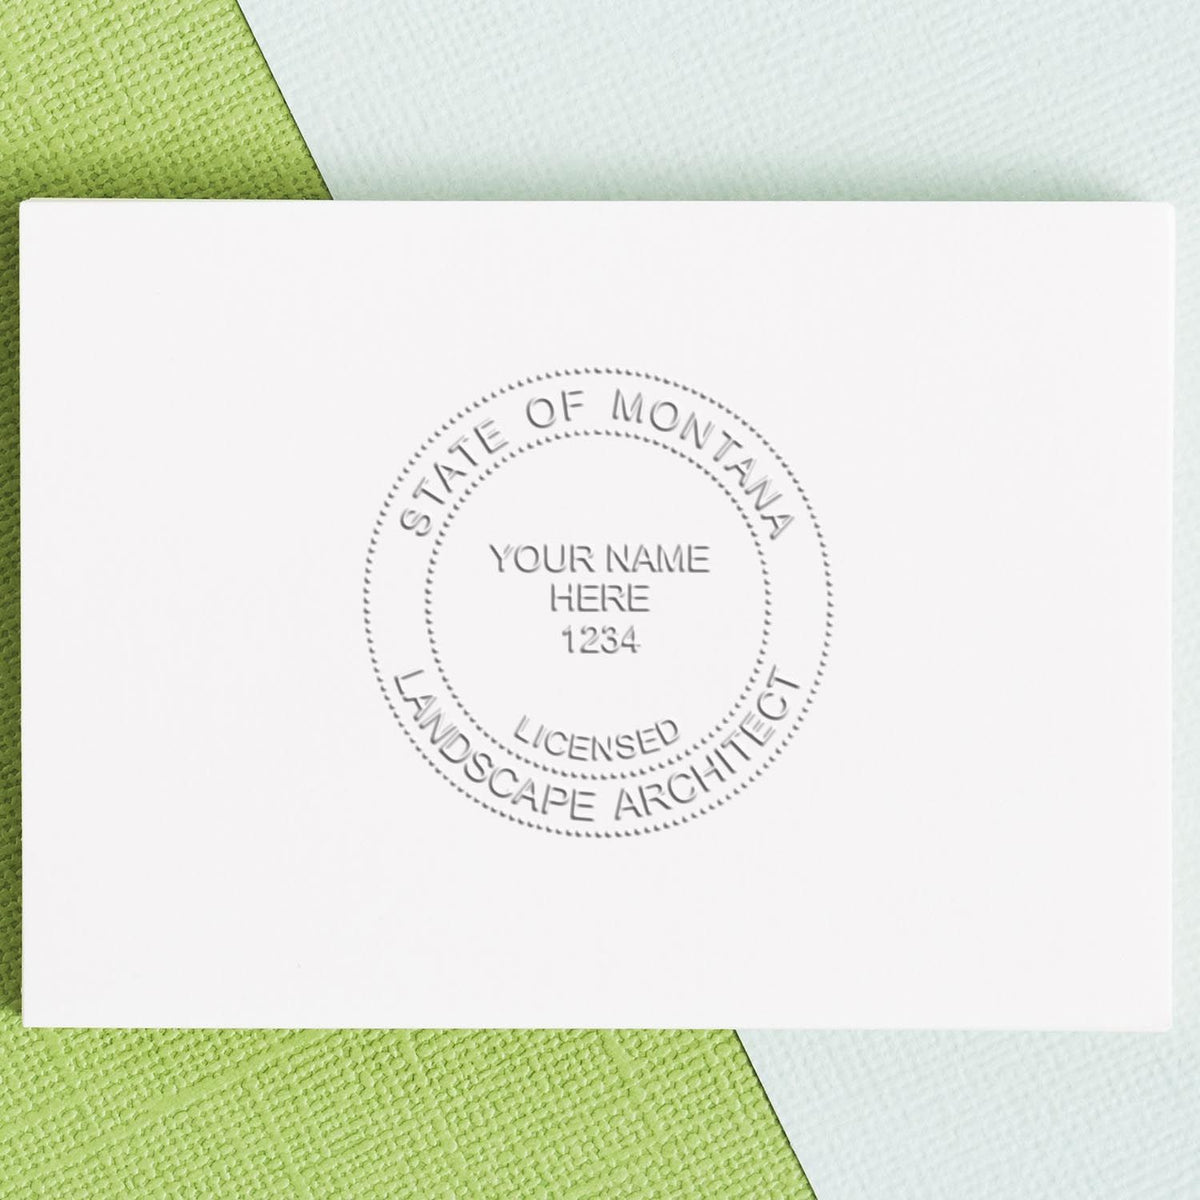 An in use photo of the Gift Montana Landscape Architect Seal showing a sample imprint on a cardstock